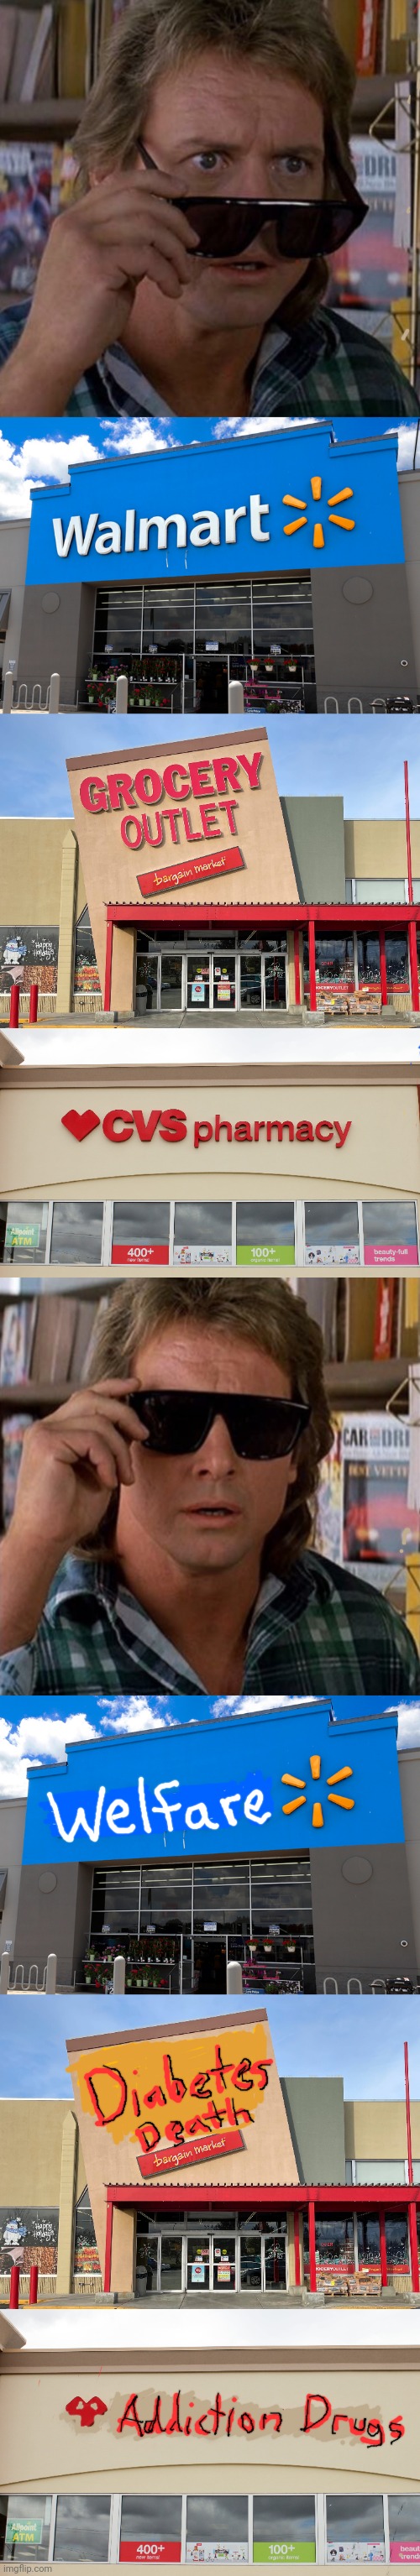 They live, corporate hell | image tagged in walmart,diabetes,drugs,china | made w/ Imgflip meme maker